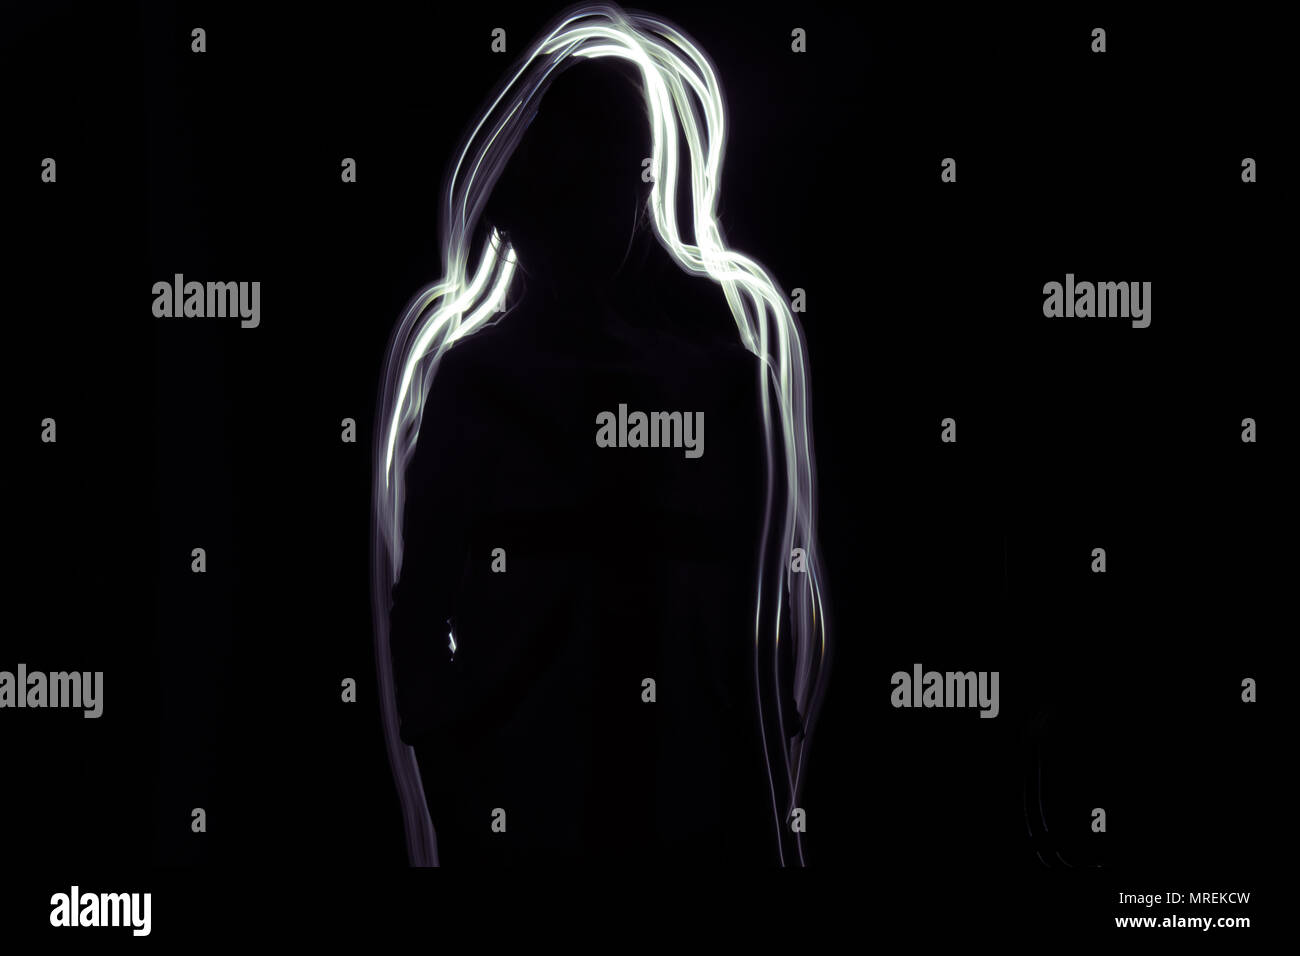 A silhouette of a girl on a black background. Glow white-purple line is around her. Stock Photo